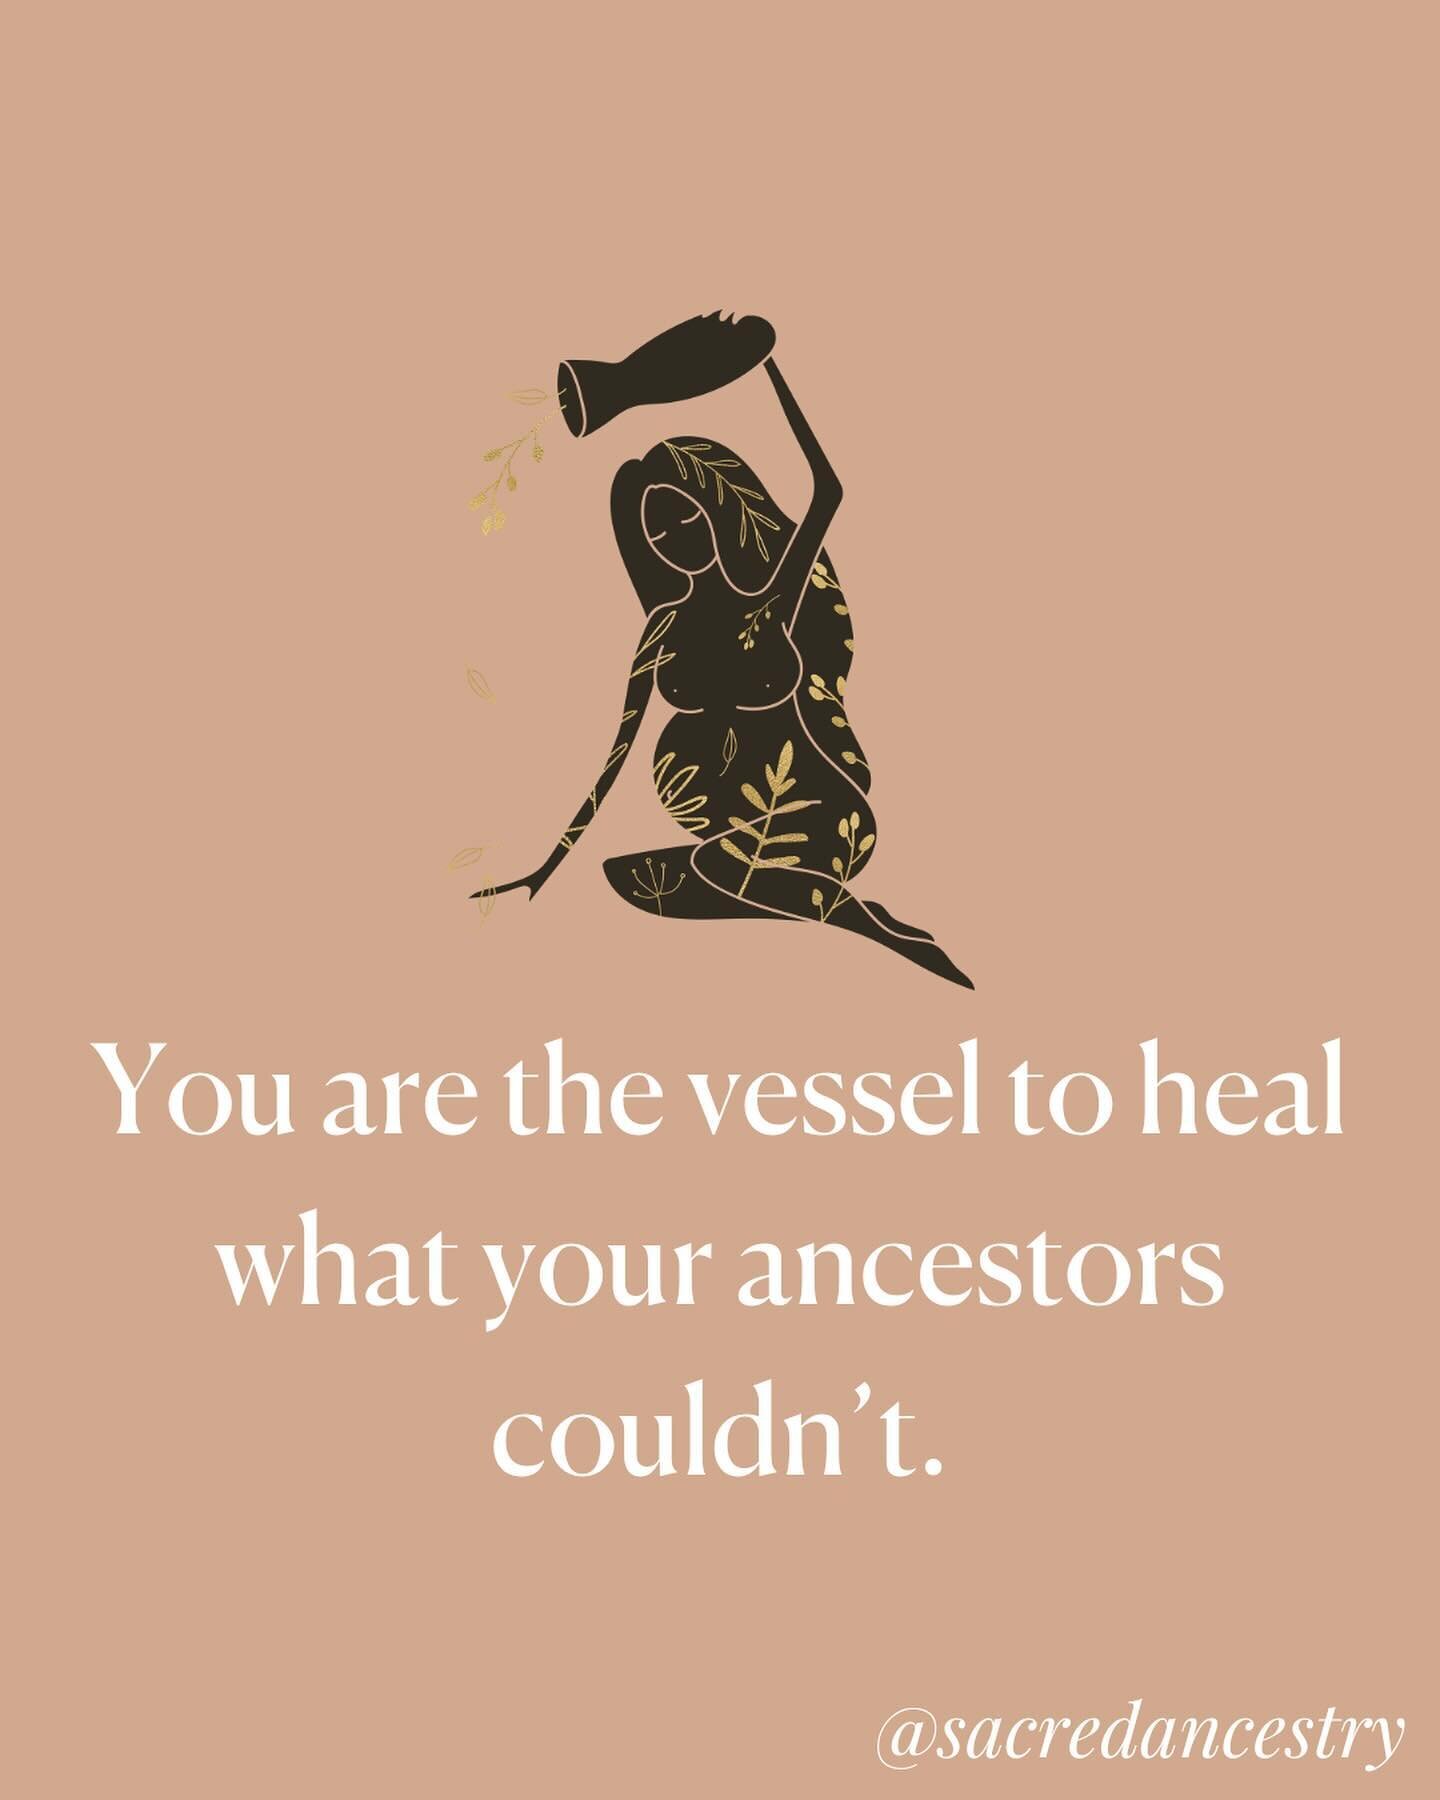 You have the power to shift the course of generations. 🌎🌿 You have the choice to give this life all you&rsquo;ve got. 🙏🏼

You are a deeply sacred being.

It&rsquo;s time to reclaim the sacredness in YOU &mdash; and to rise from the ashes into you